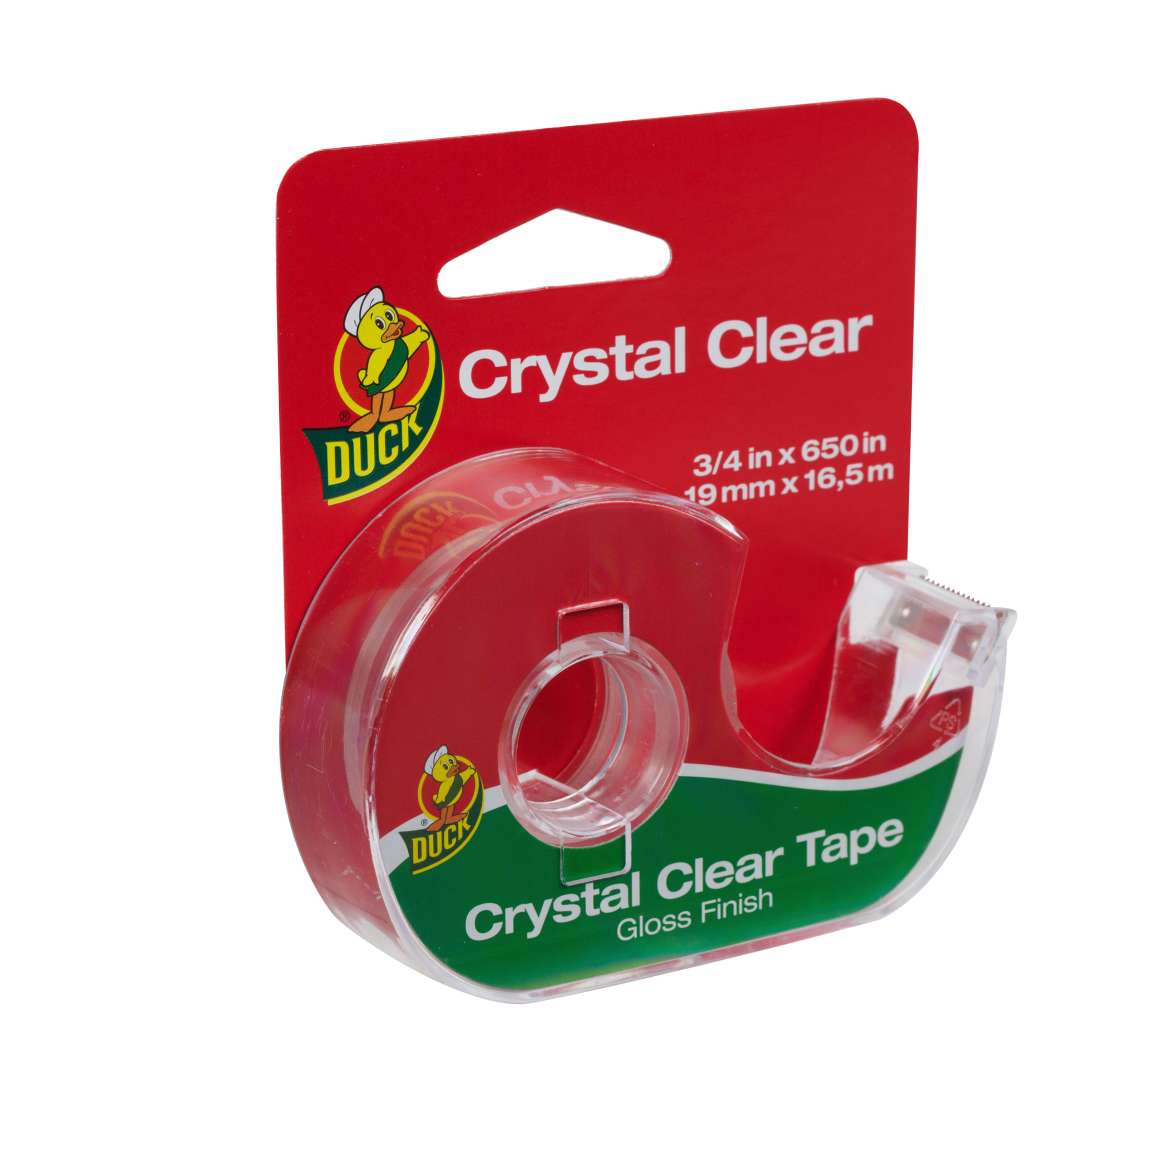 Crystal Clear Invisible Tape Image